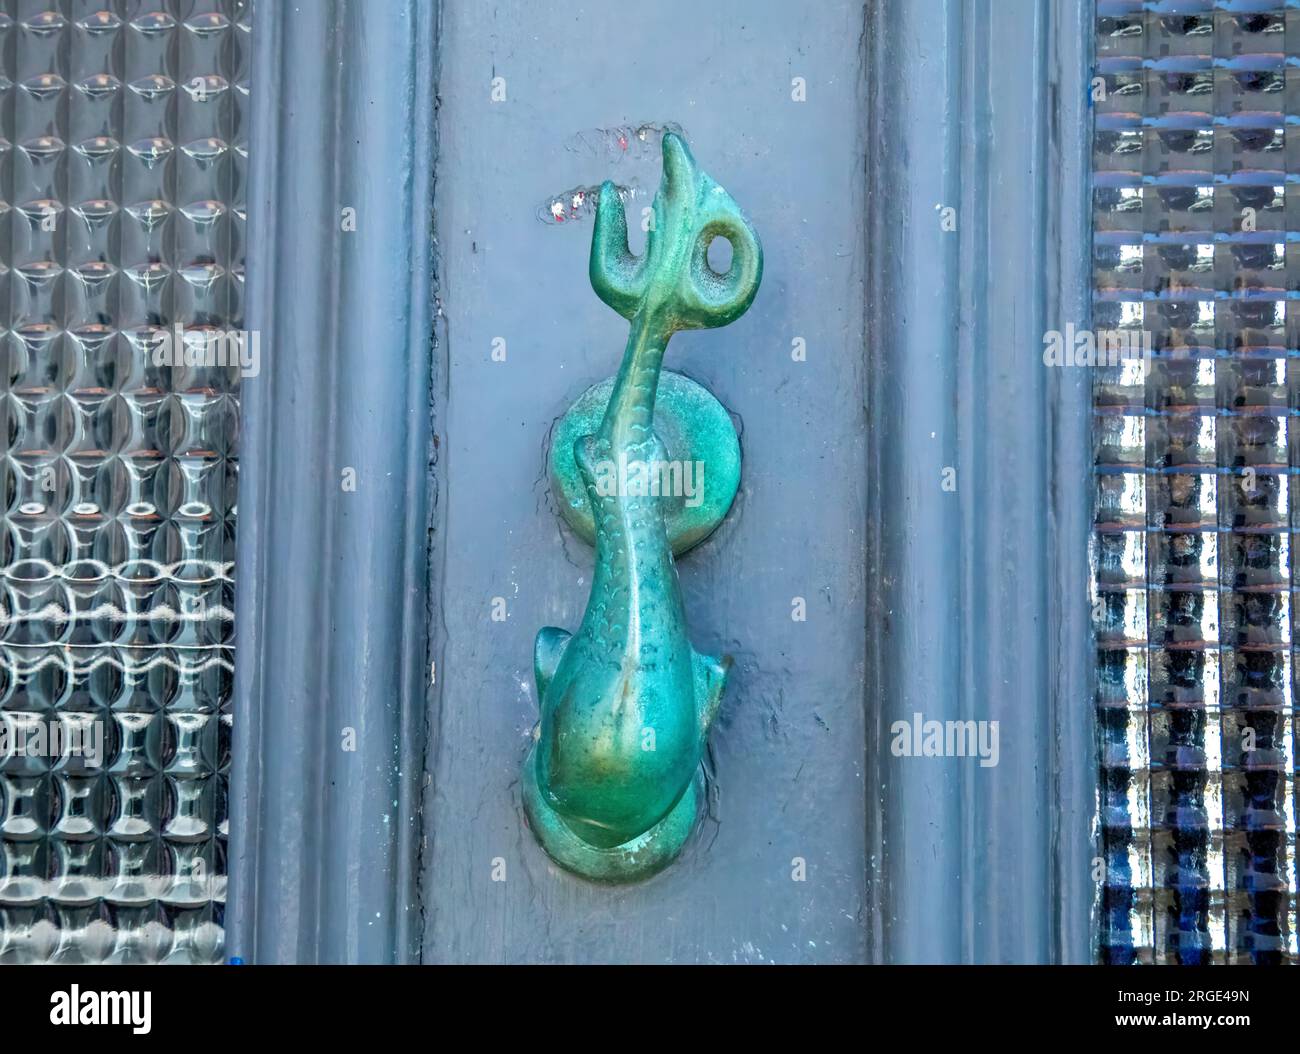 Brass door knocker depicting a nautical theme of a dolphin on a front door in a coastal town Stock Photo